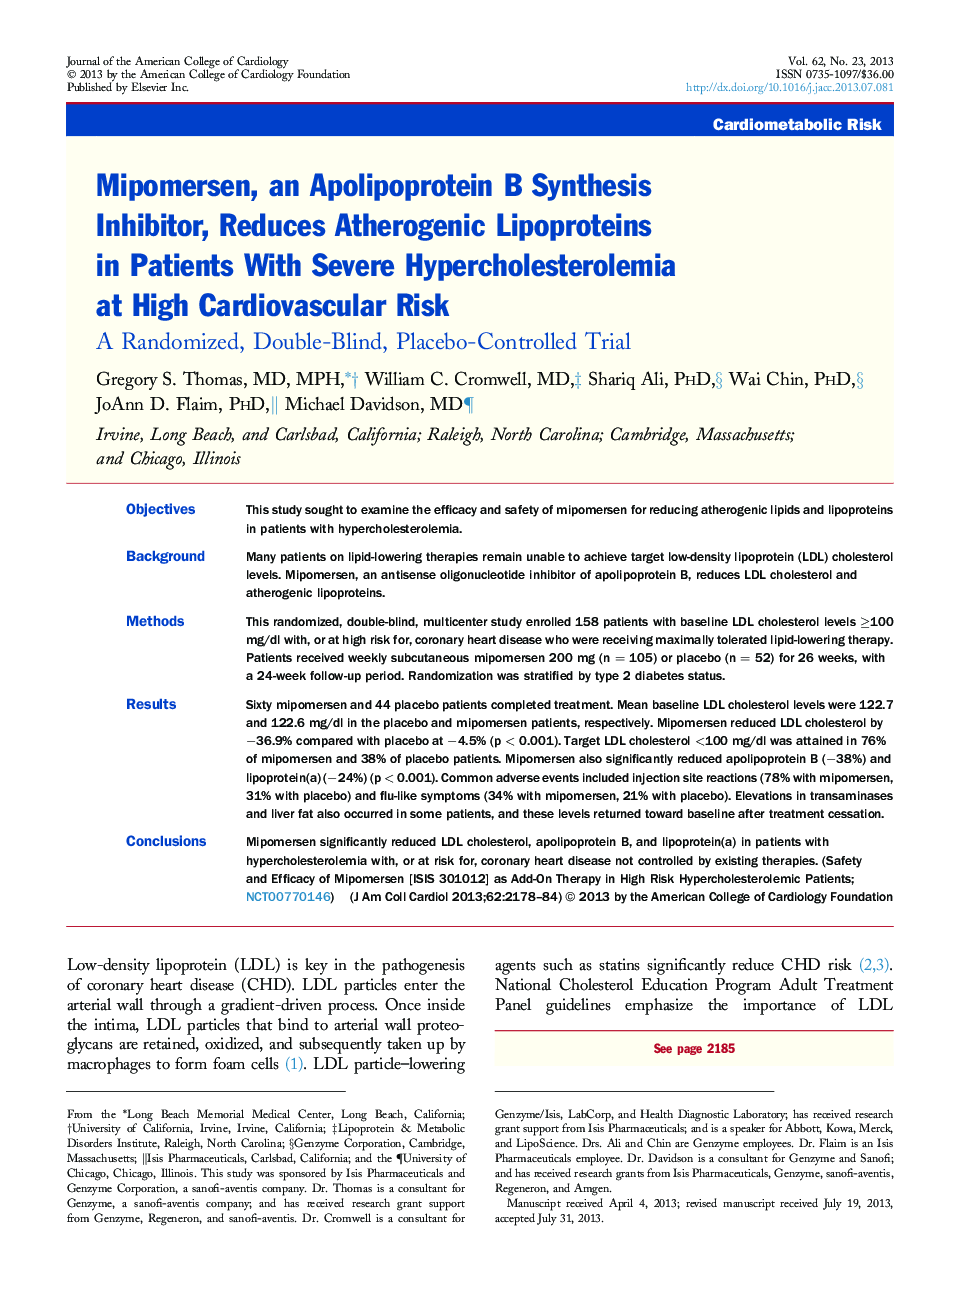 Mipomersen, an Apolipoprotein B Synthesis Inhibitor, Reduces Atherogenic Lipoproteins in Patients With Severe Hypercholesterolemia at High Cardiovascular Risk : A Randomized, Double-Blind, Placebo-Controlled Trial